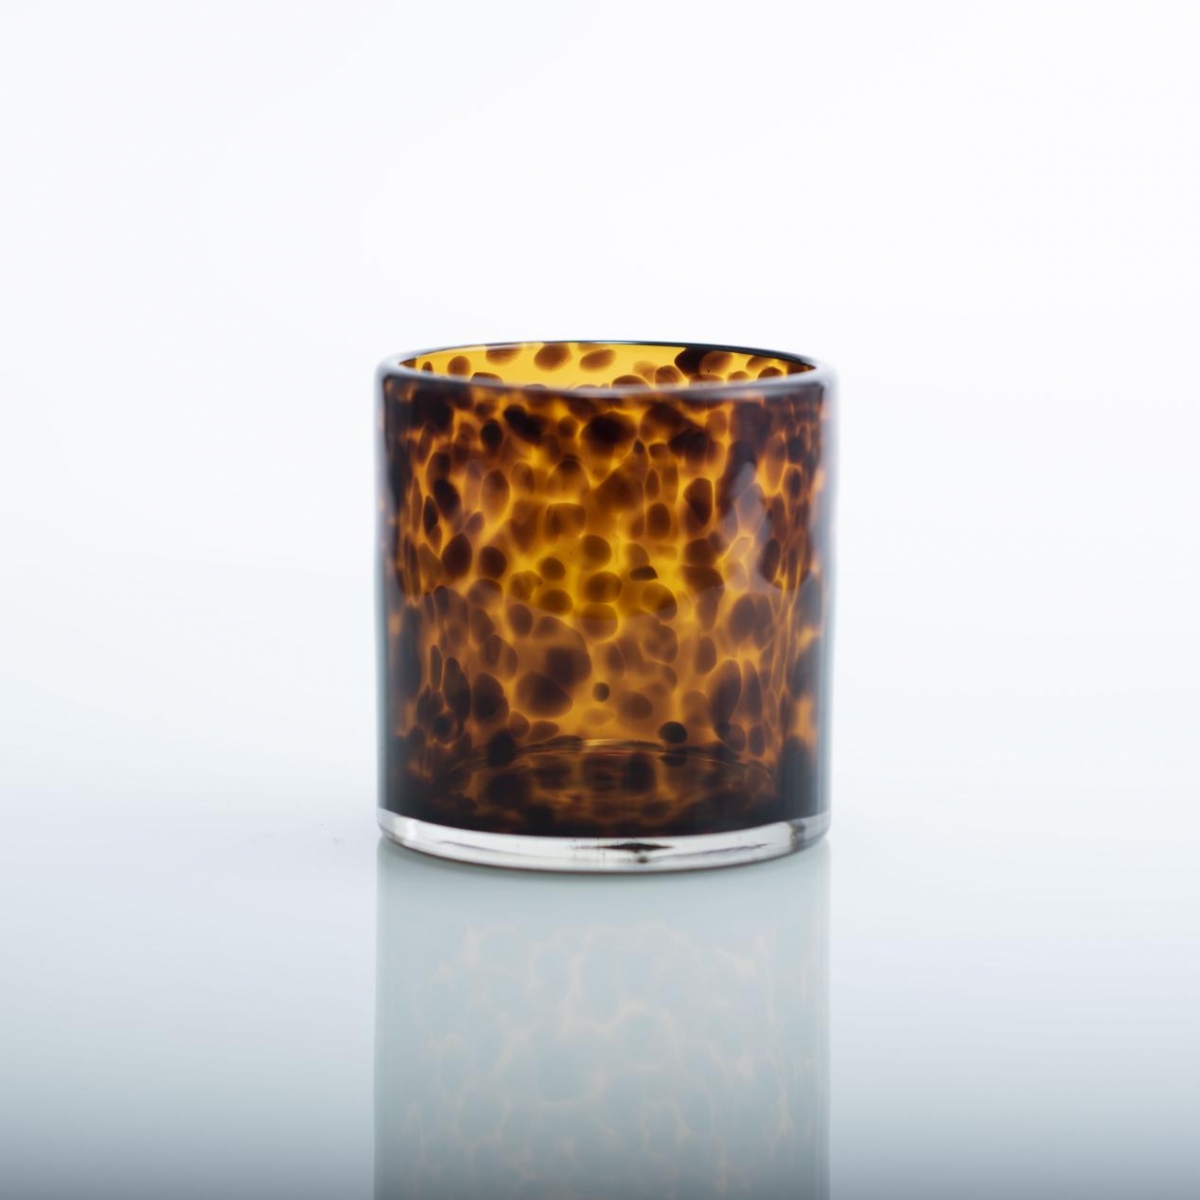 Best Tortoise Shell Candle Jar ：Handmade Glass Candle Holder ,Amber Glass Jar , China Factory , Price-HOWCANDLE-Candles,Scented Candles,Aromatherapy Candles,Soy Candles,Vegan Candles,Jar Candles,Pillar Candles,Candle Gift Sets,Essential Oils,Reed Diffuser,Candle Holder,